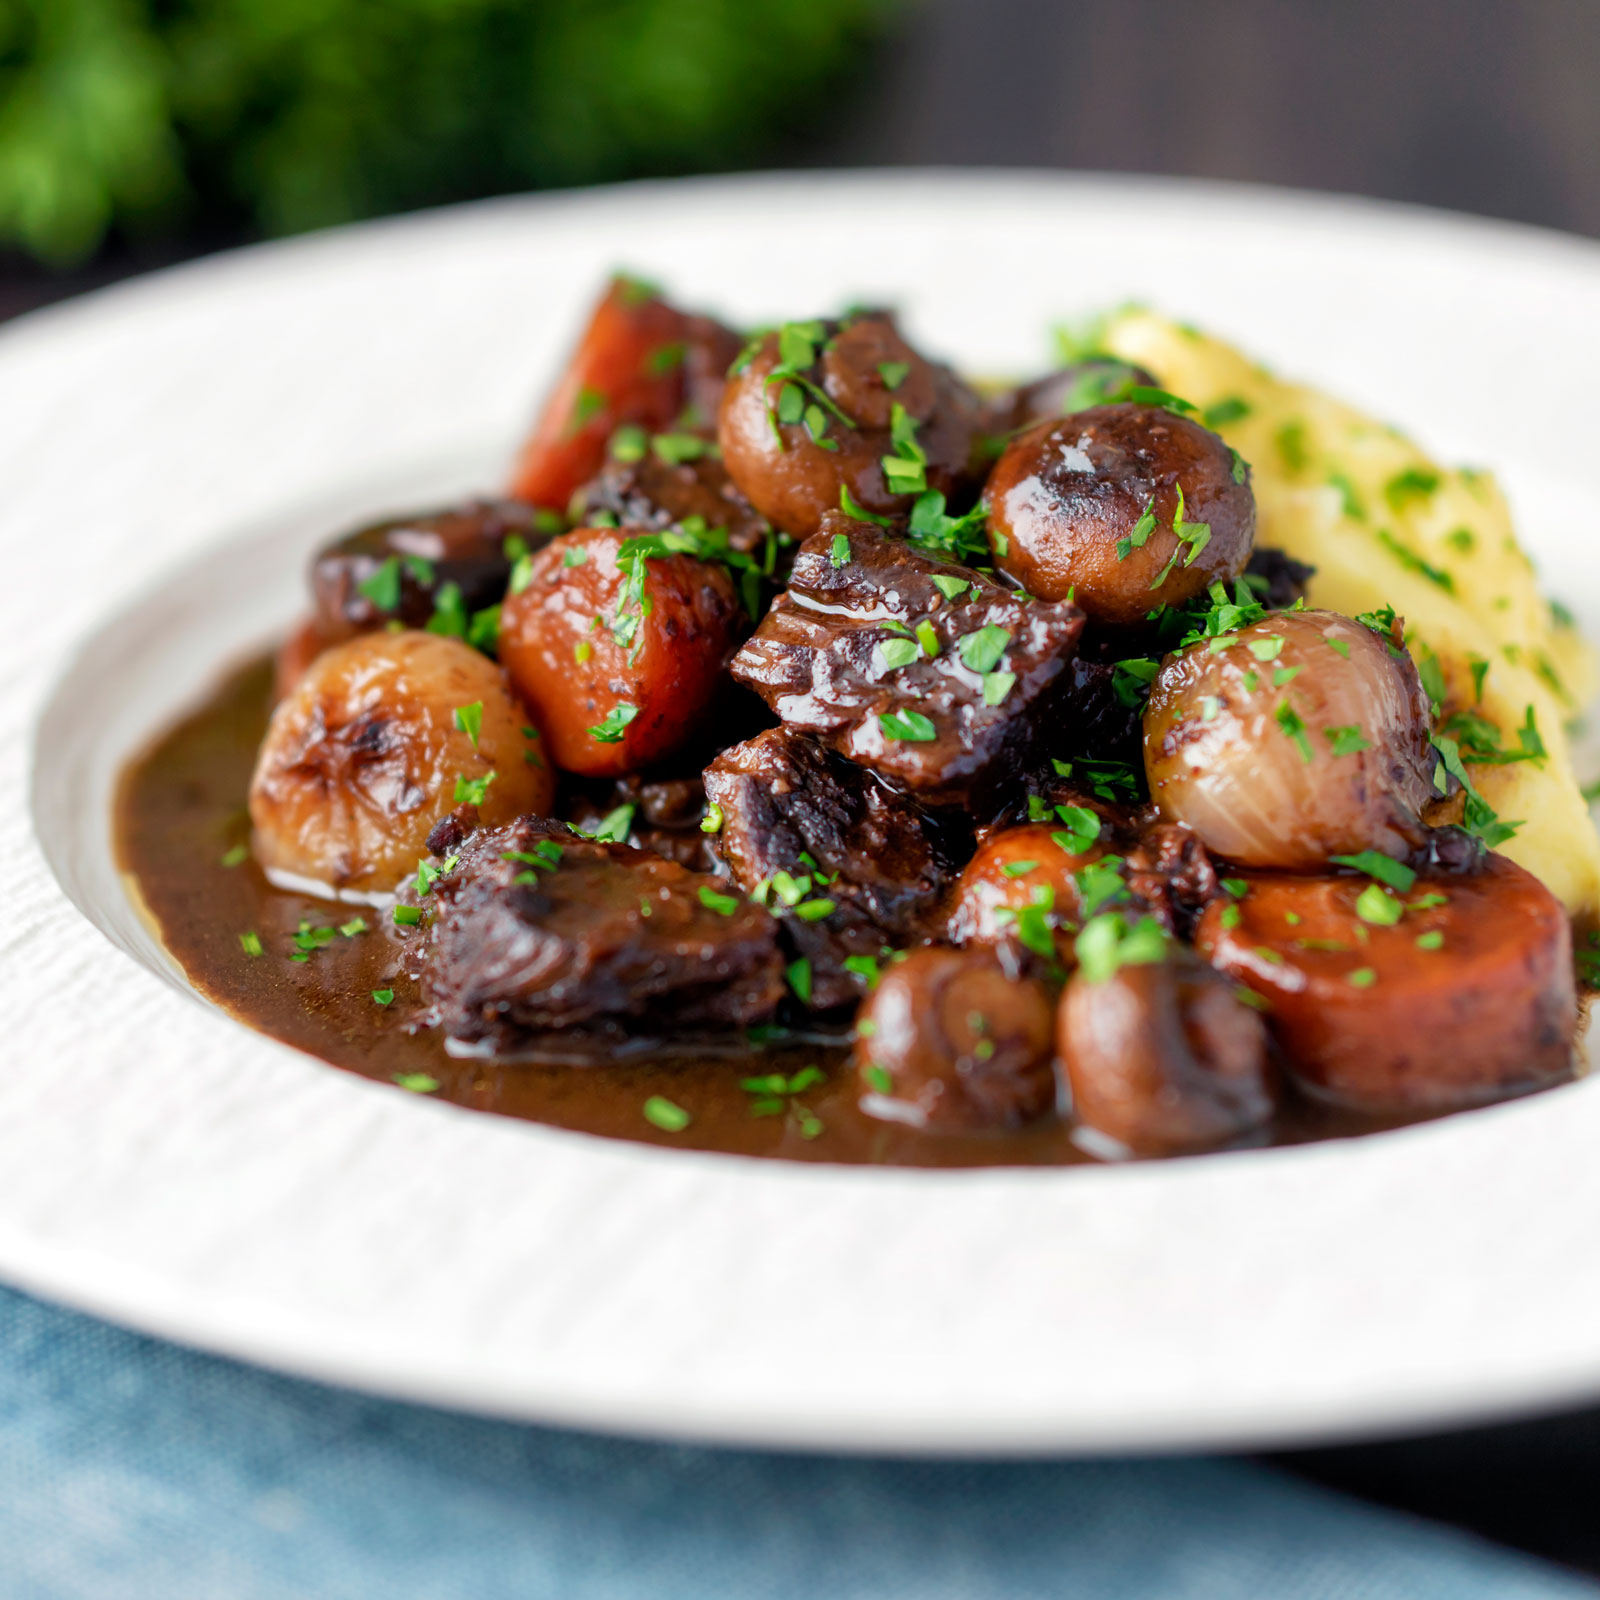 Instant Pot beef bourguignon or burgundy with carrots, mushrooms & pearl onions.